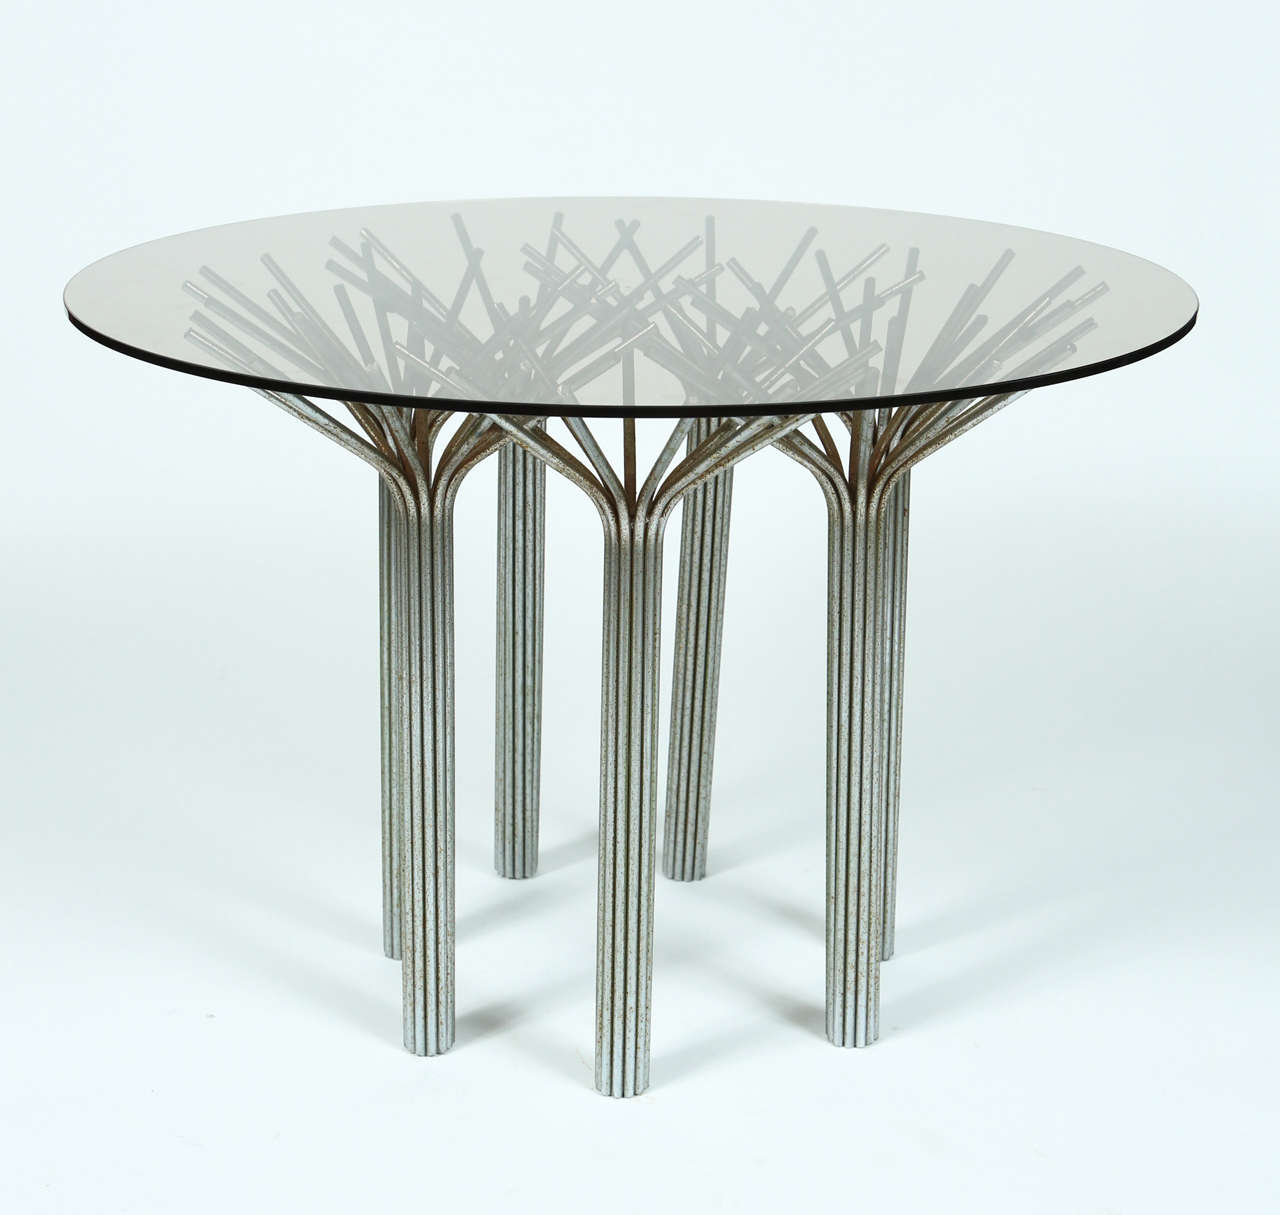 Seven stem daisy table by Gerald McCabe c.1960's.